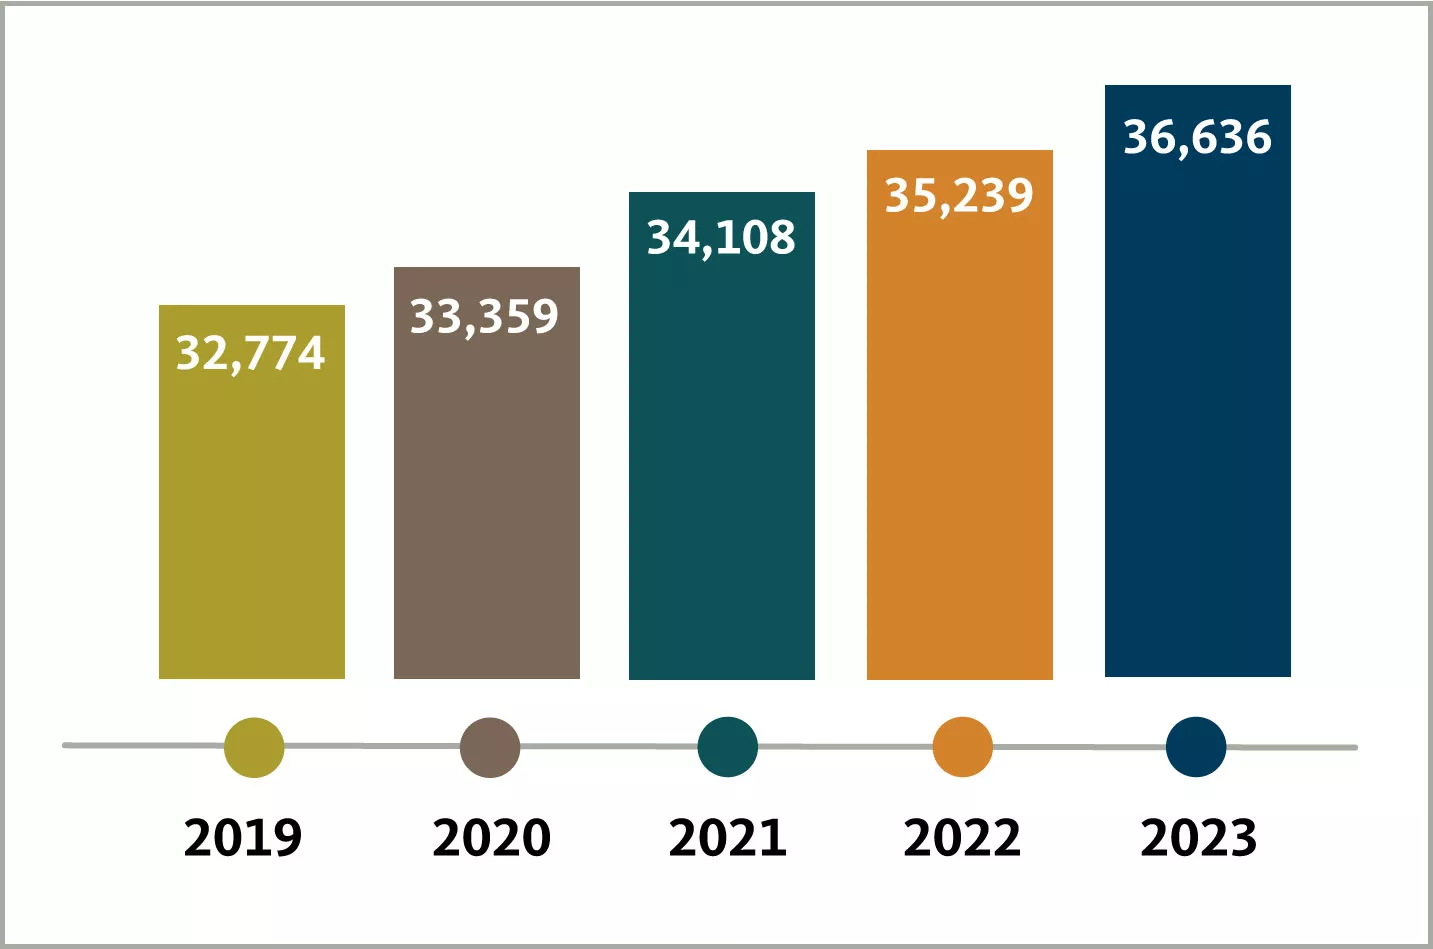 Student enrollment trends last 5 years (2019-2023): 32774, 33359, 34108, 35239, 36636